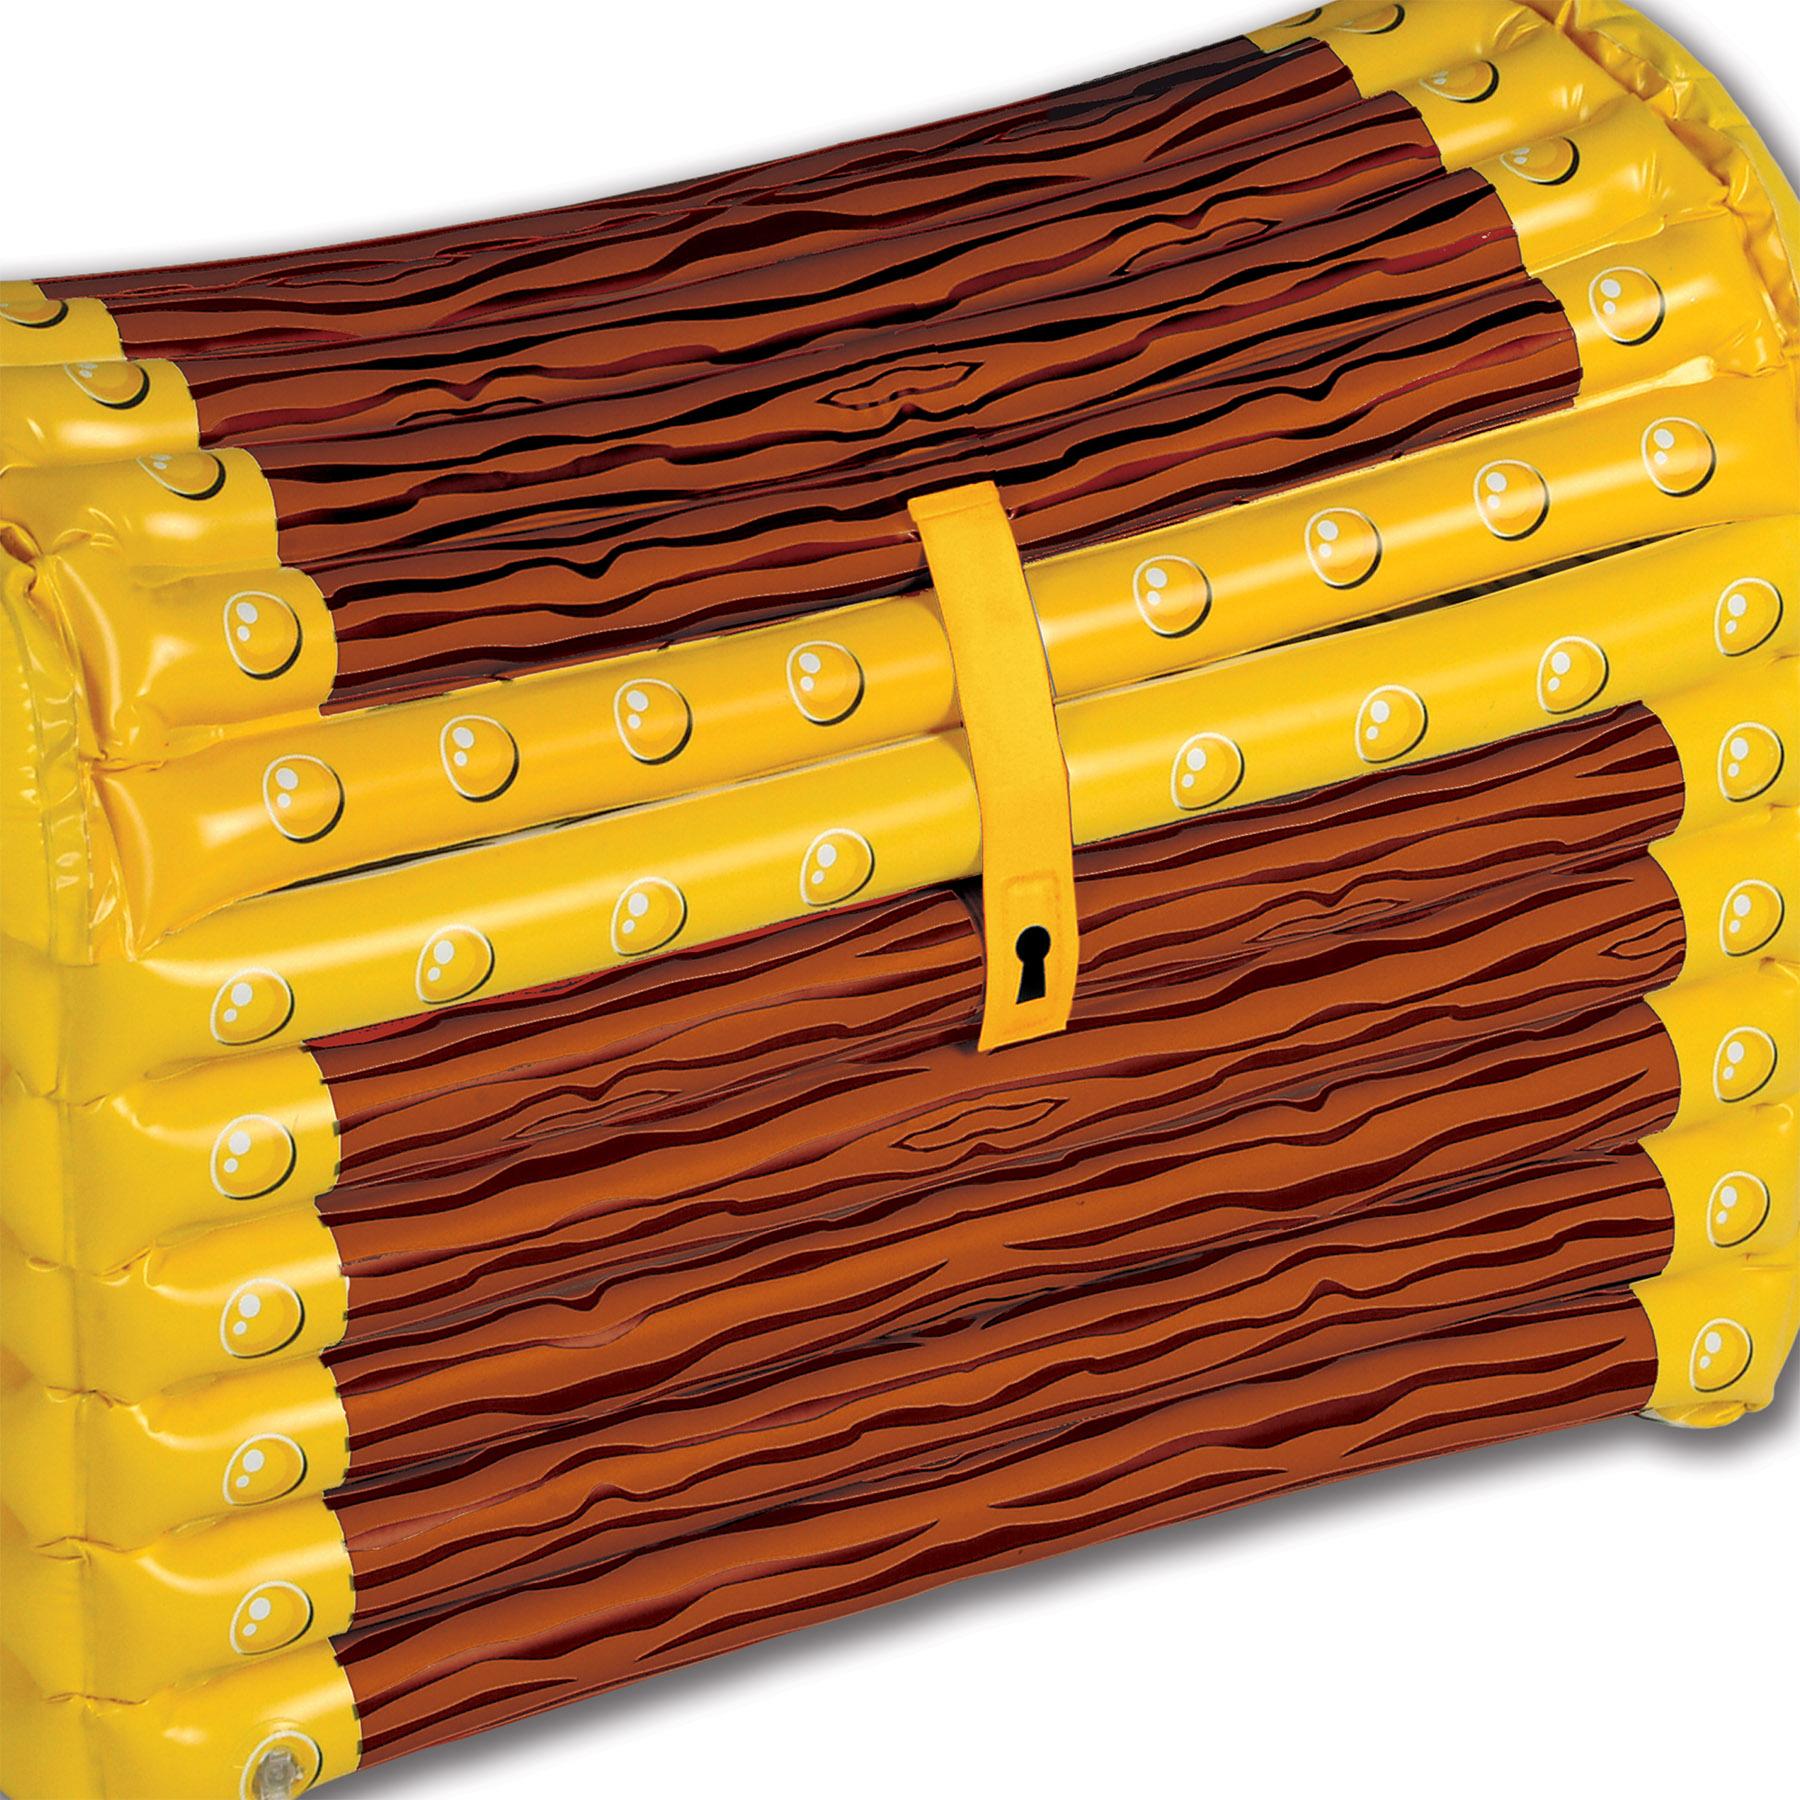 Inflatable Treasure Chest Cooler (holds apprx 48 12-Oz cans)